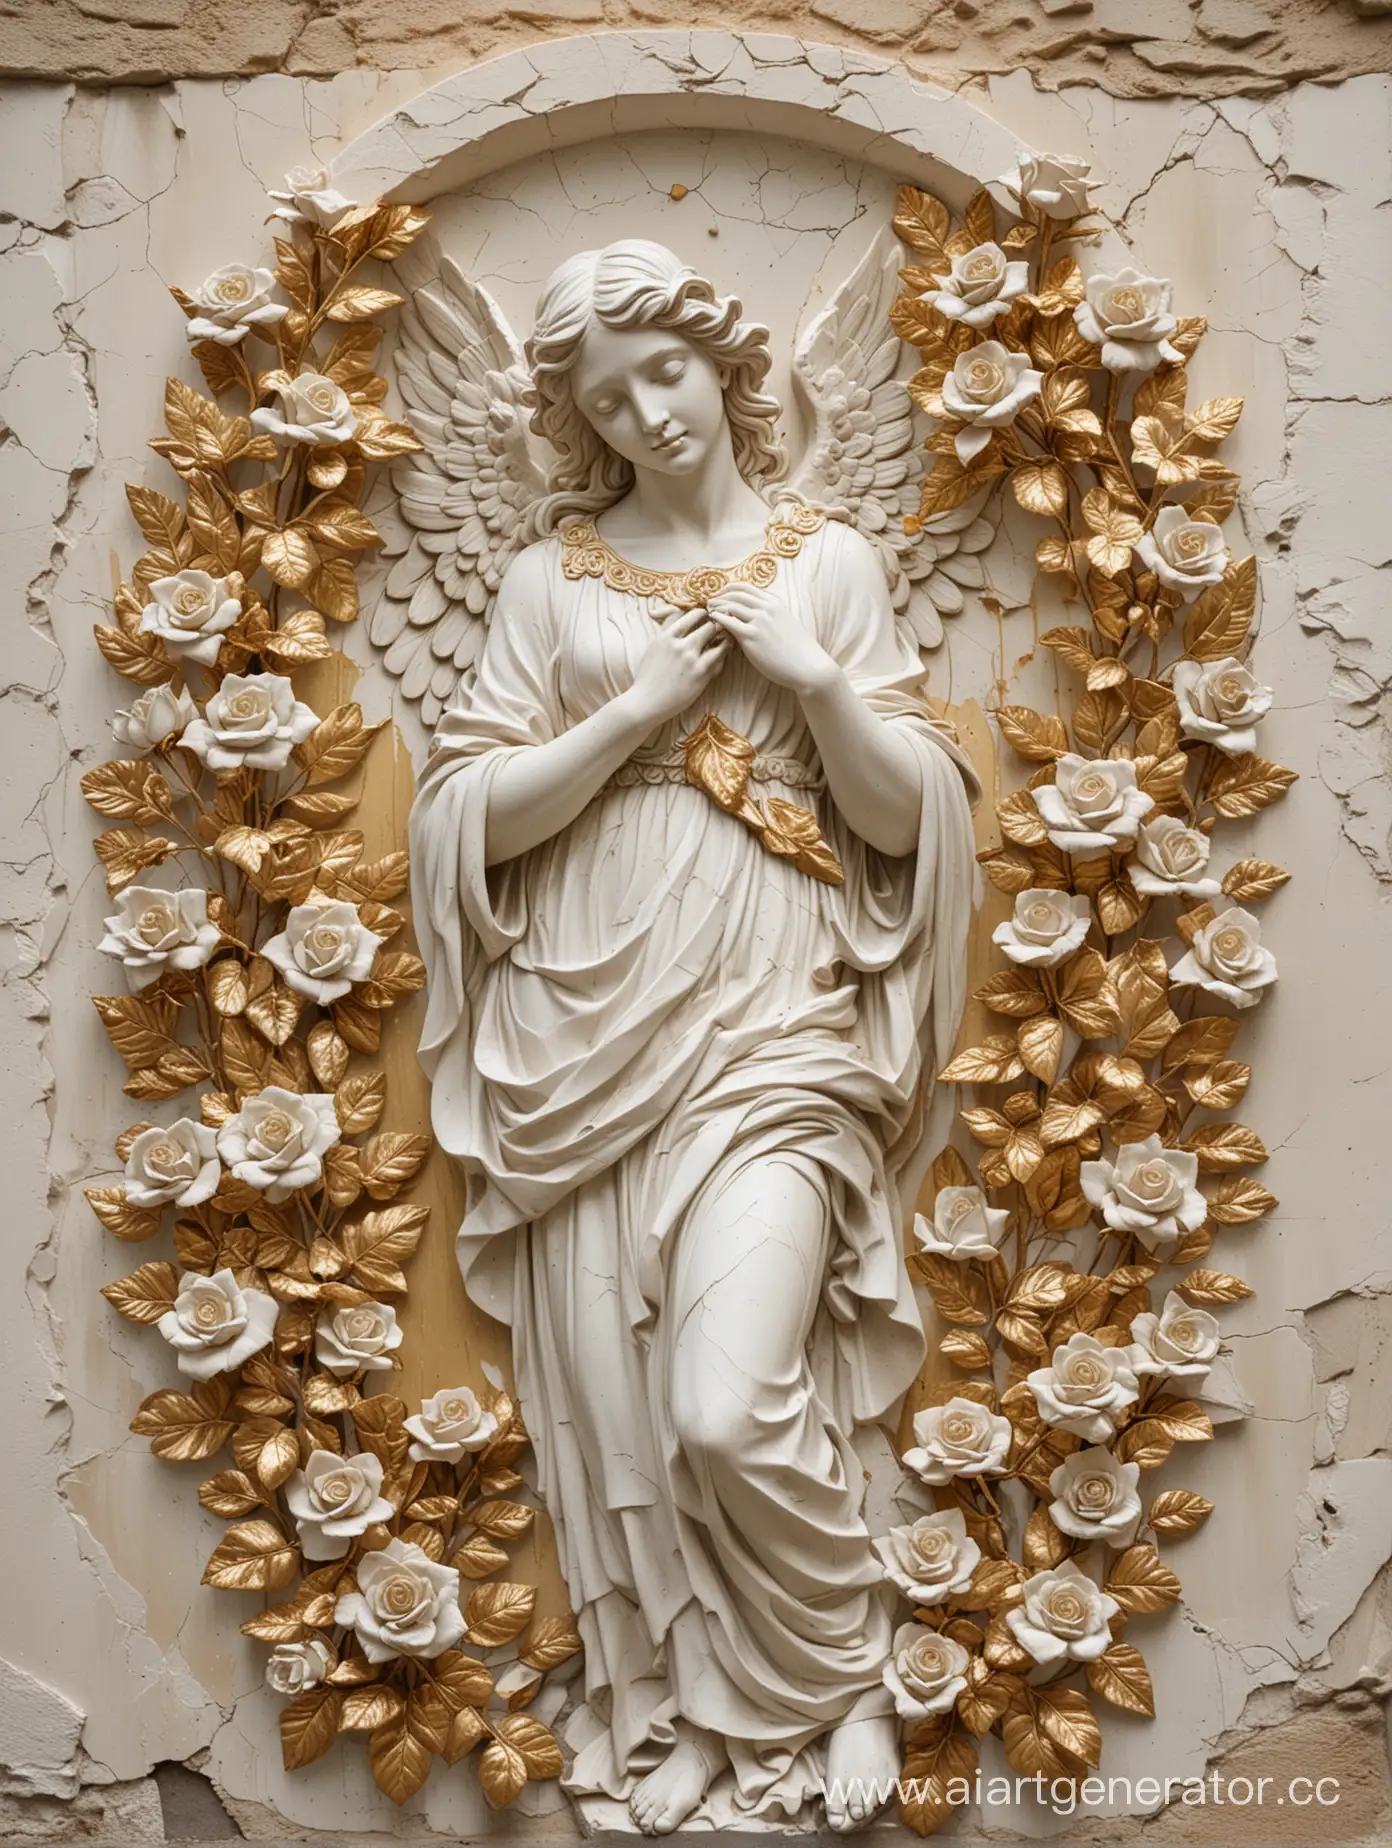 Stone-Angel-BasRelief-Sculpture-Adorned-with-Gold-Roses-on-Cracked-Stucco-Wall